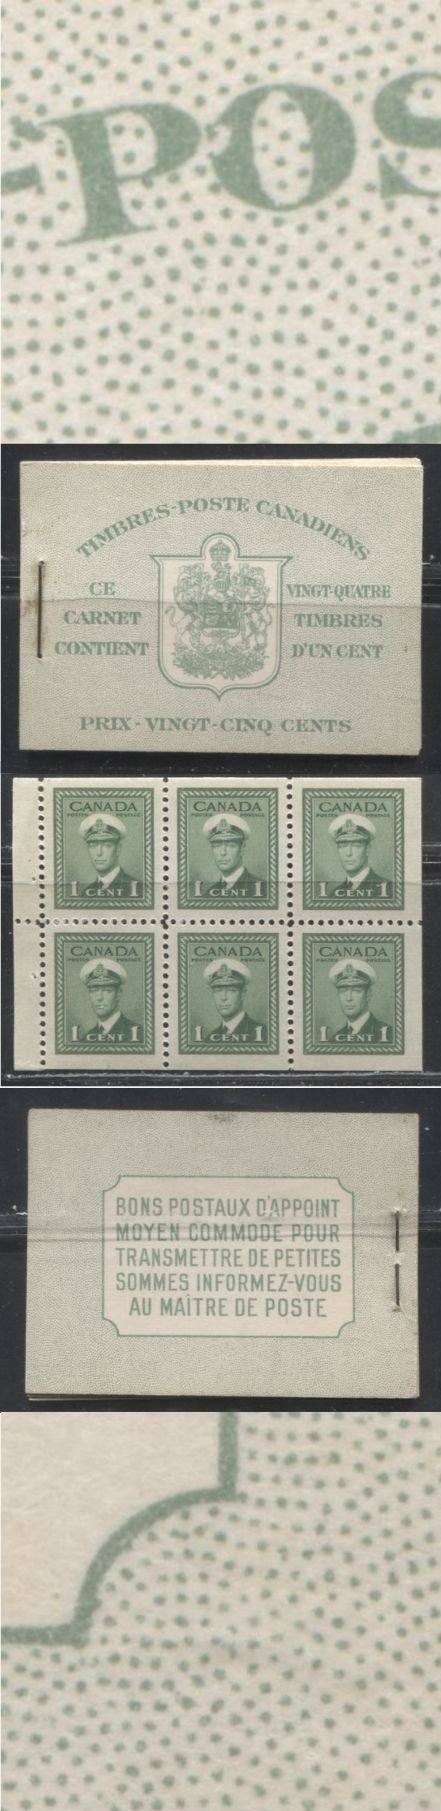 Lot 242 Canada #BK32d 1942-1949 War Issue, Complete 25¢ French Booklet, 4 Panes of 1c Green,  Smooth Vertical Wove Paper, Harris Front Cover Type IIk, Back Cover Type Diii, 7c & 6c Airmail Rates Page